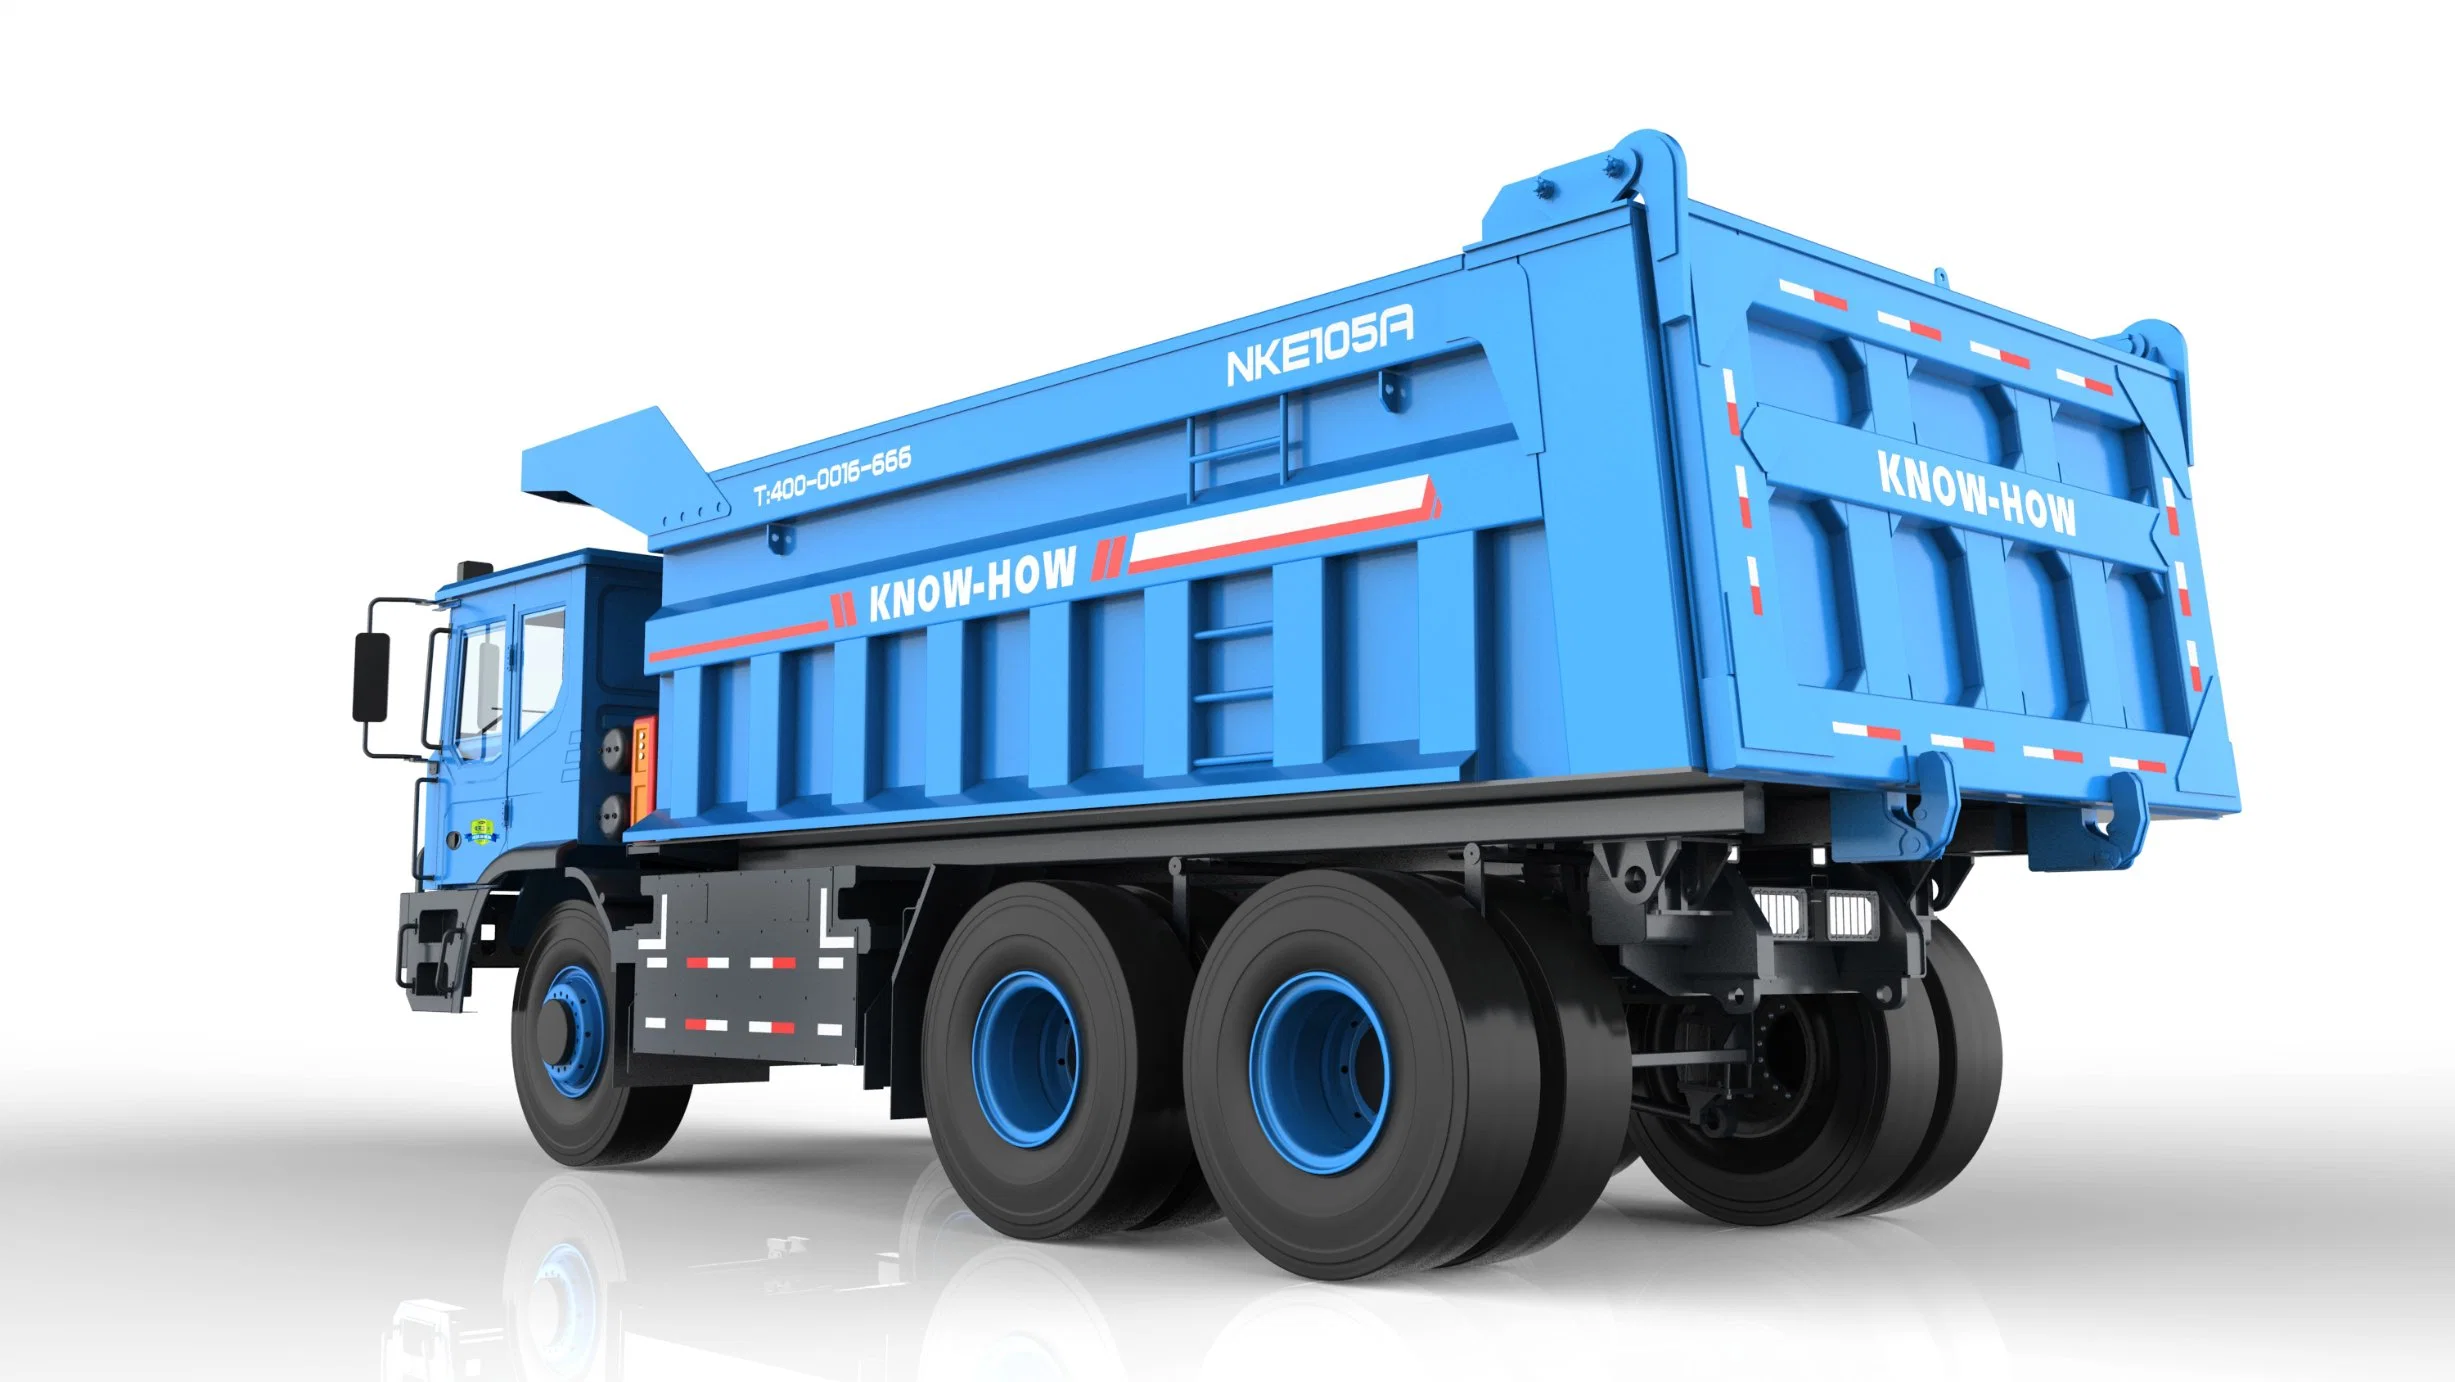 Know-How Tipper 105 Ton Mining 105t New Energy Truck Hot Sale Nke105D4